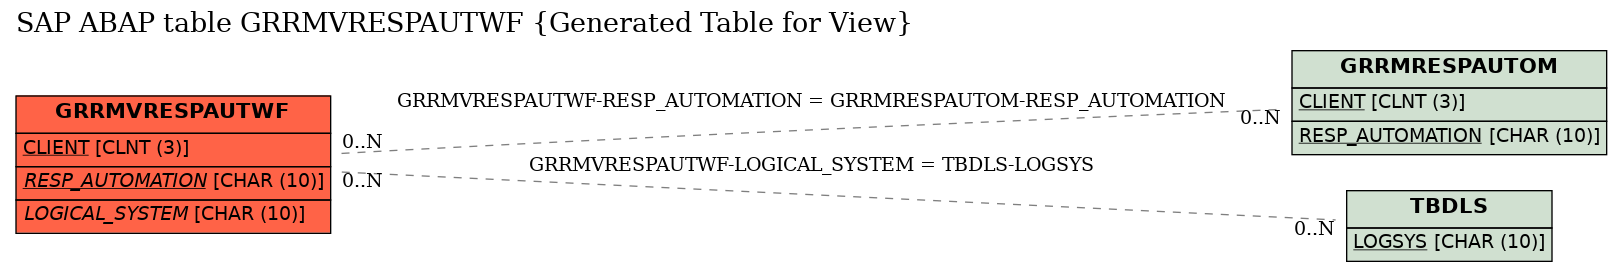 E-R Diagram for table GRRMVRESPAUTWF (Generated Table for View)